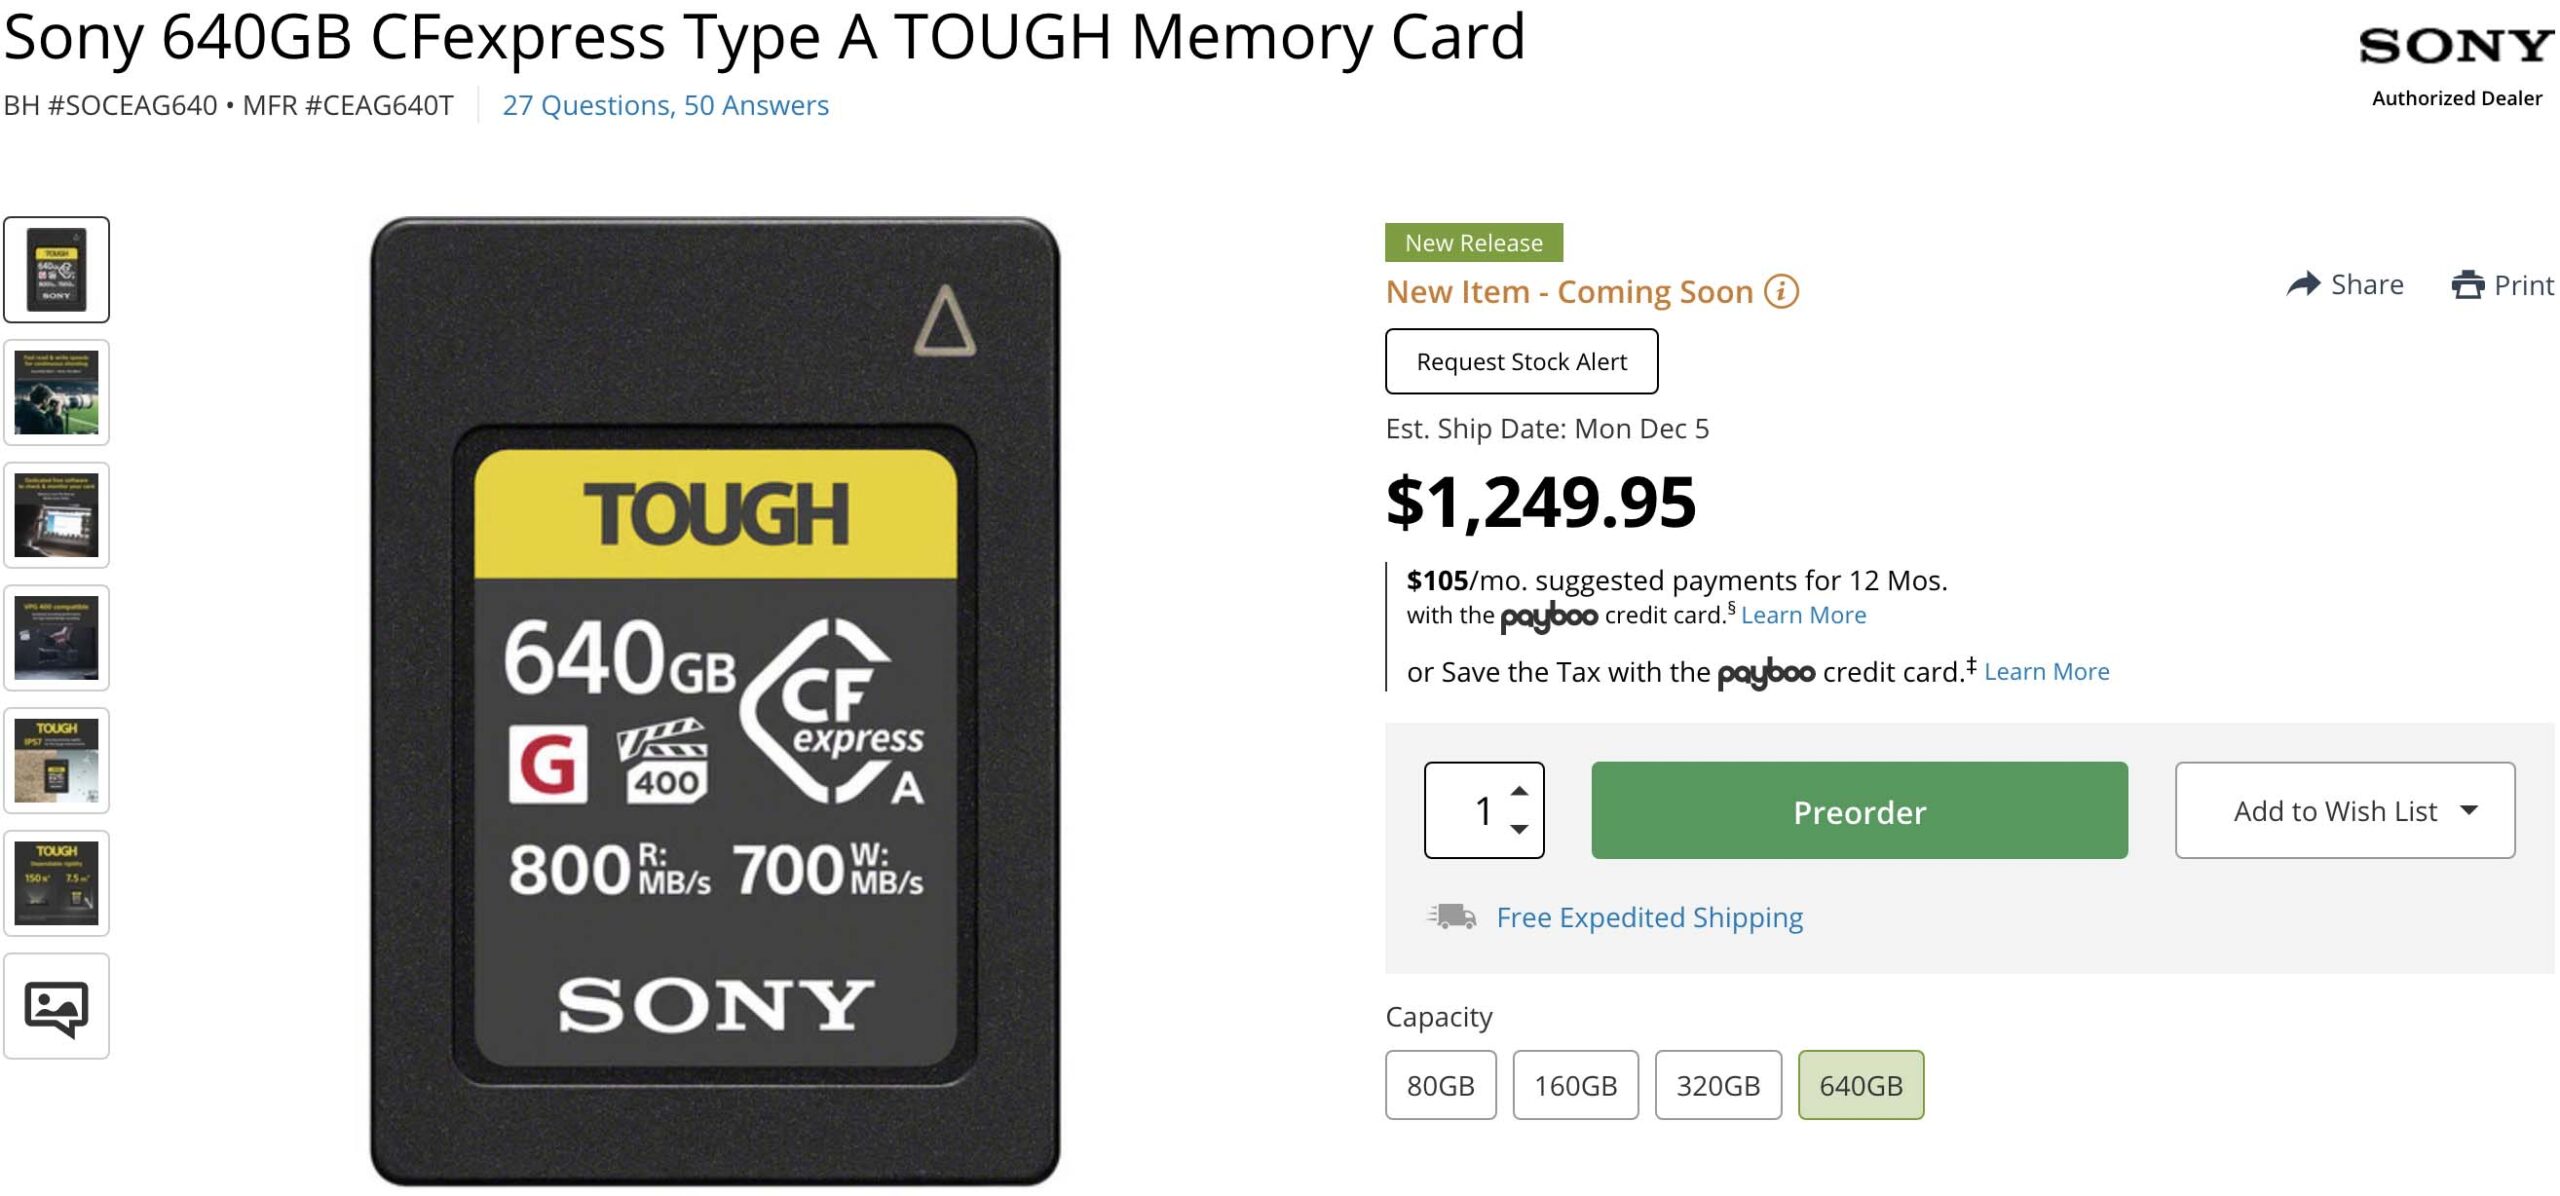 Sony 640GB & 320GB CFexpress Type A Tough Memory Card Preorders